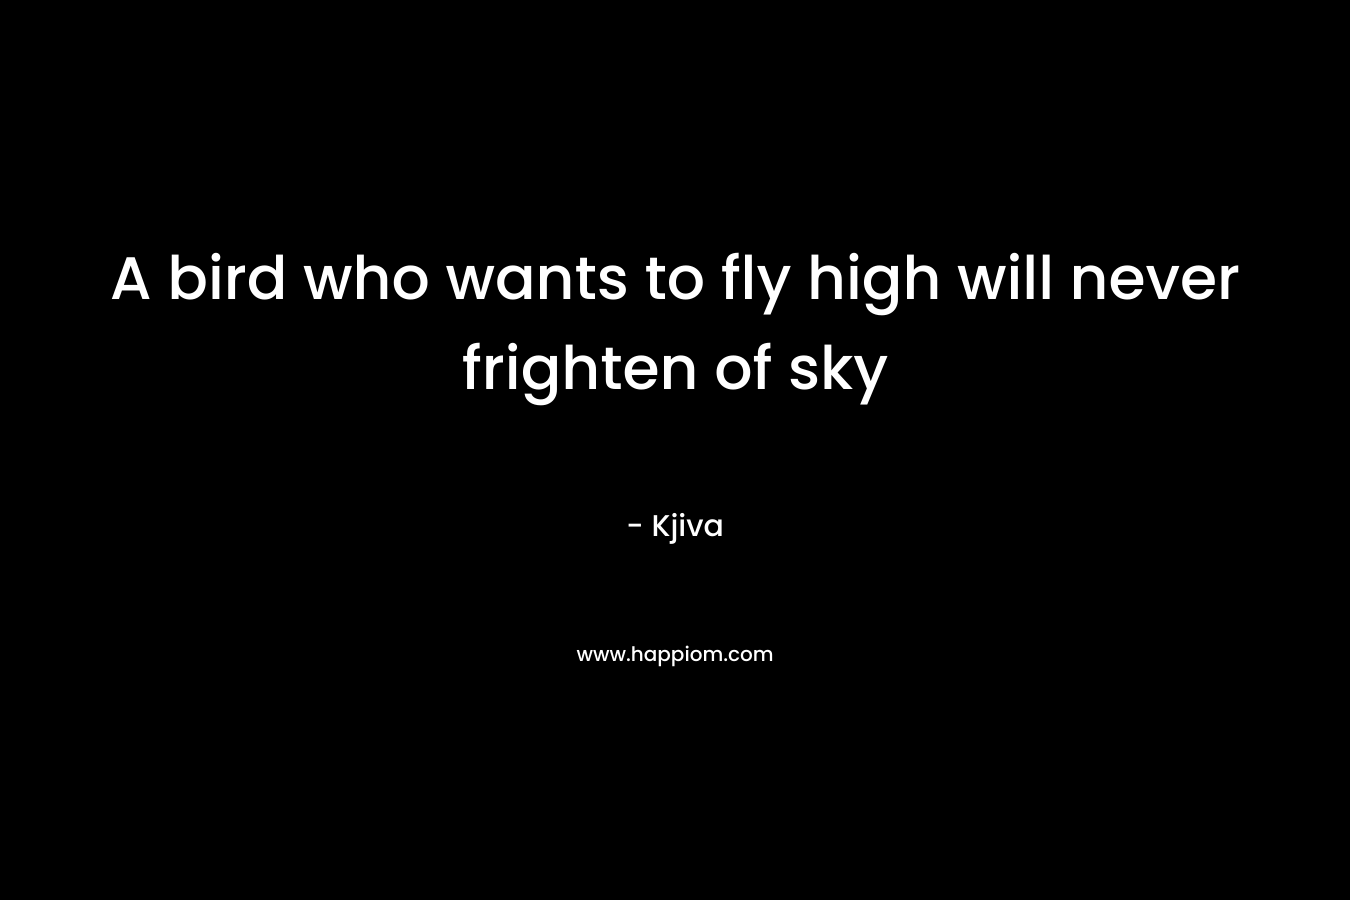 A bird who wants to fly high will never frighten of sky – Kjiva